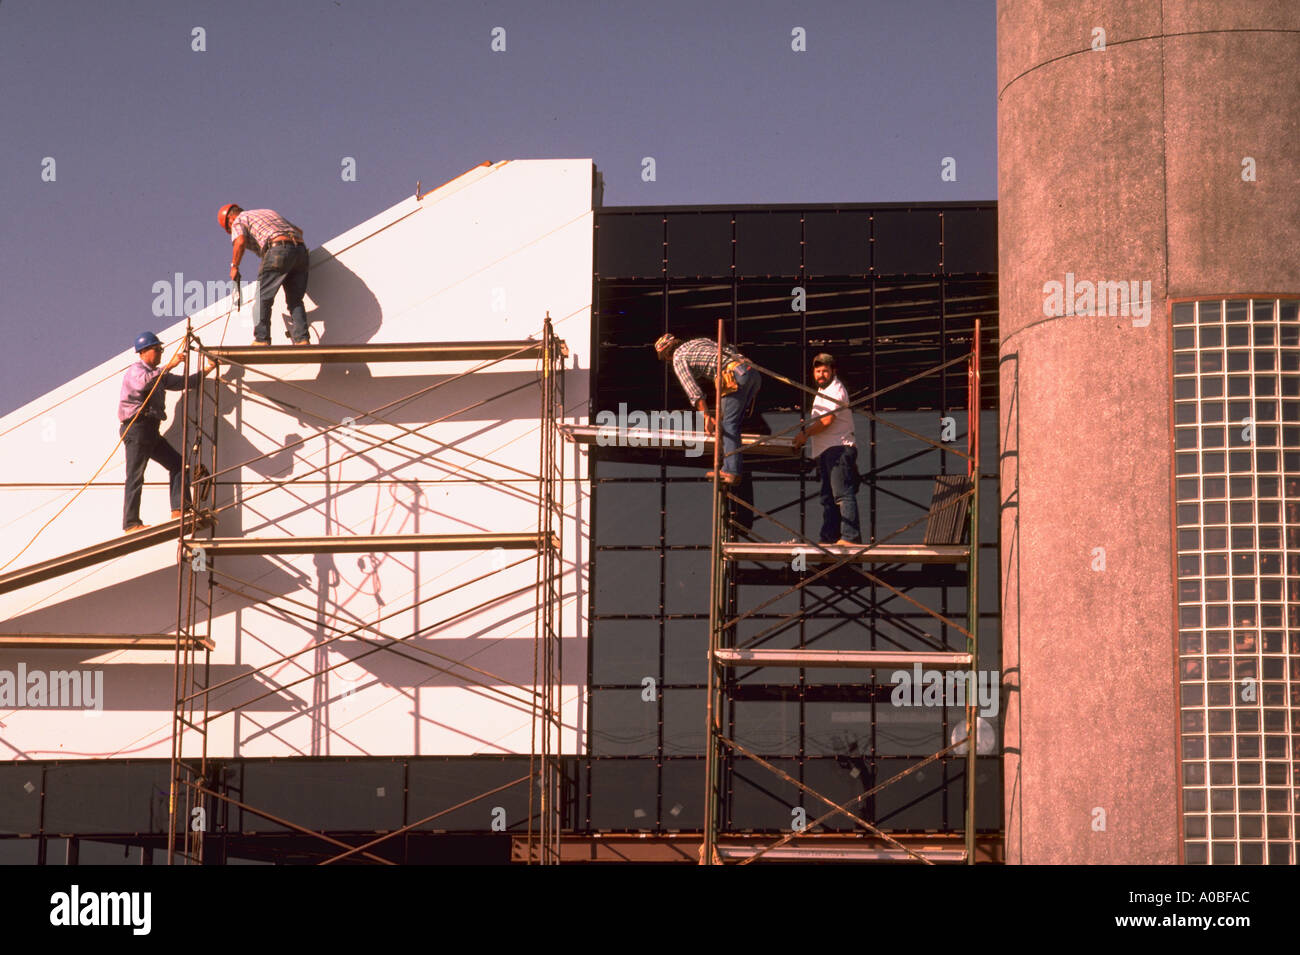 Construction workers install panels on office building in Virginia HL 1864 Stock Photo